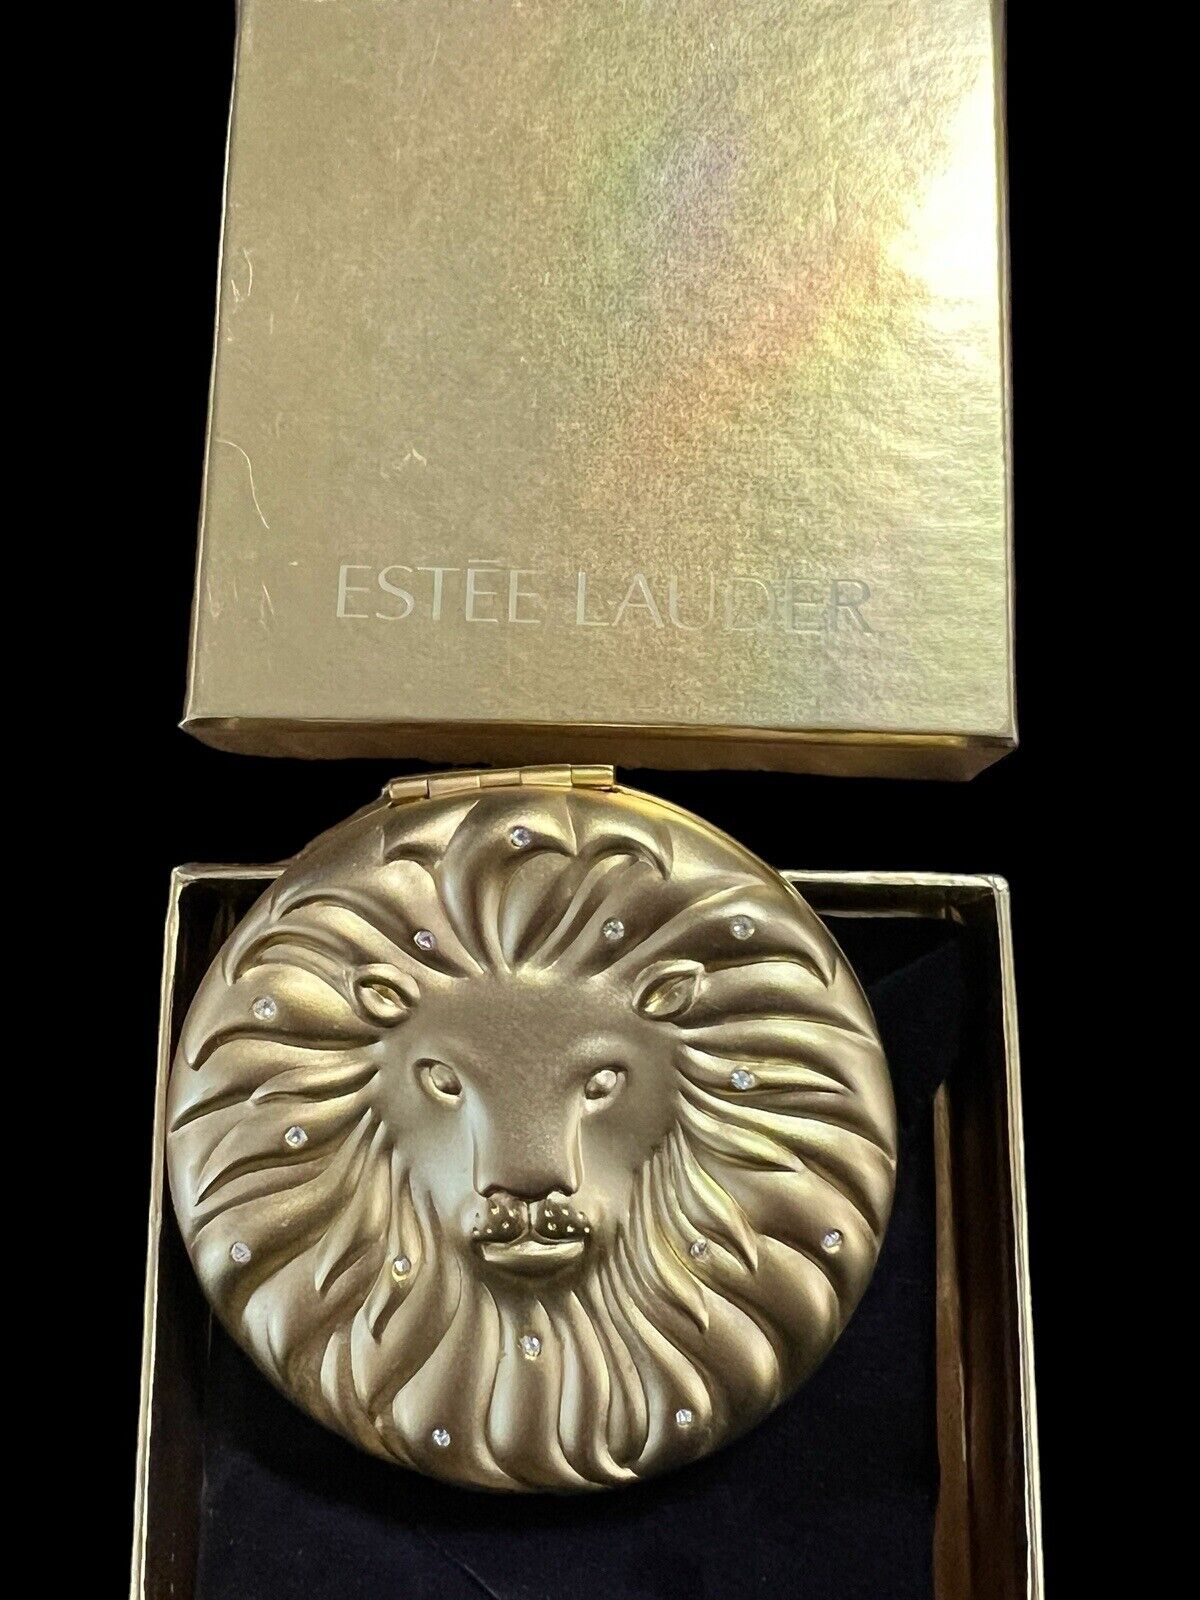 Vintage 1997 Estee Lauder Golden Lion Crystal Compact with Lucidity Powder